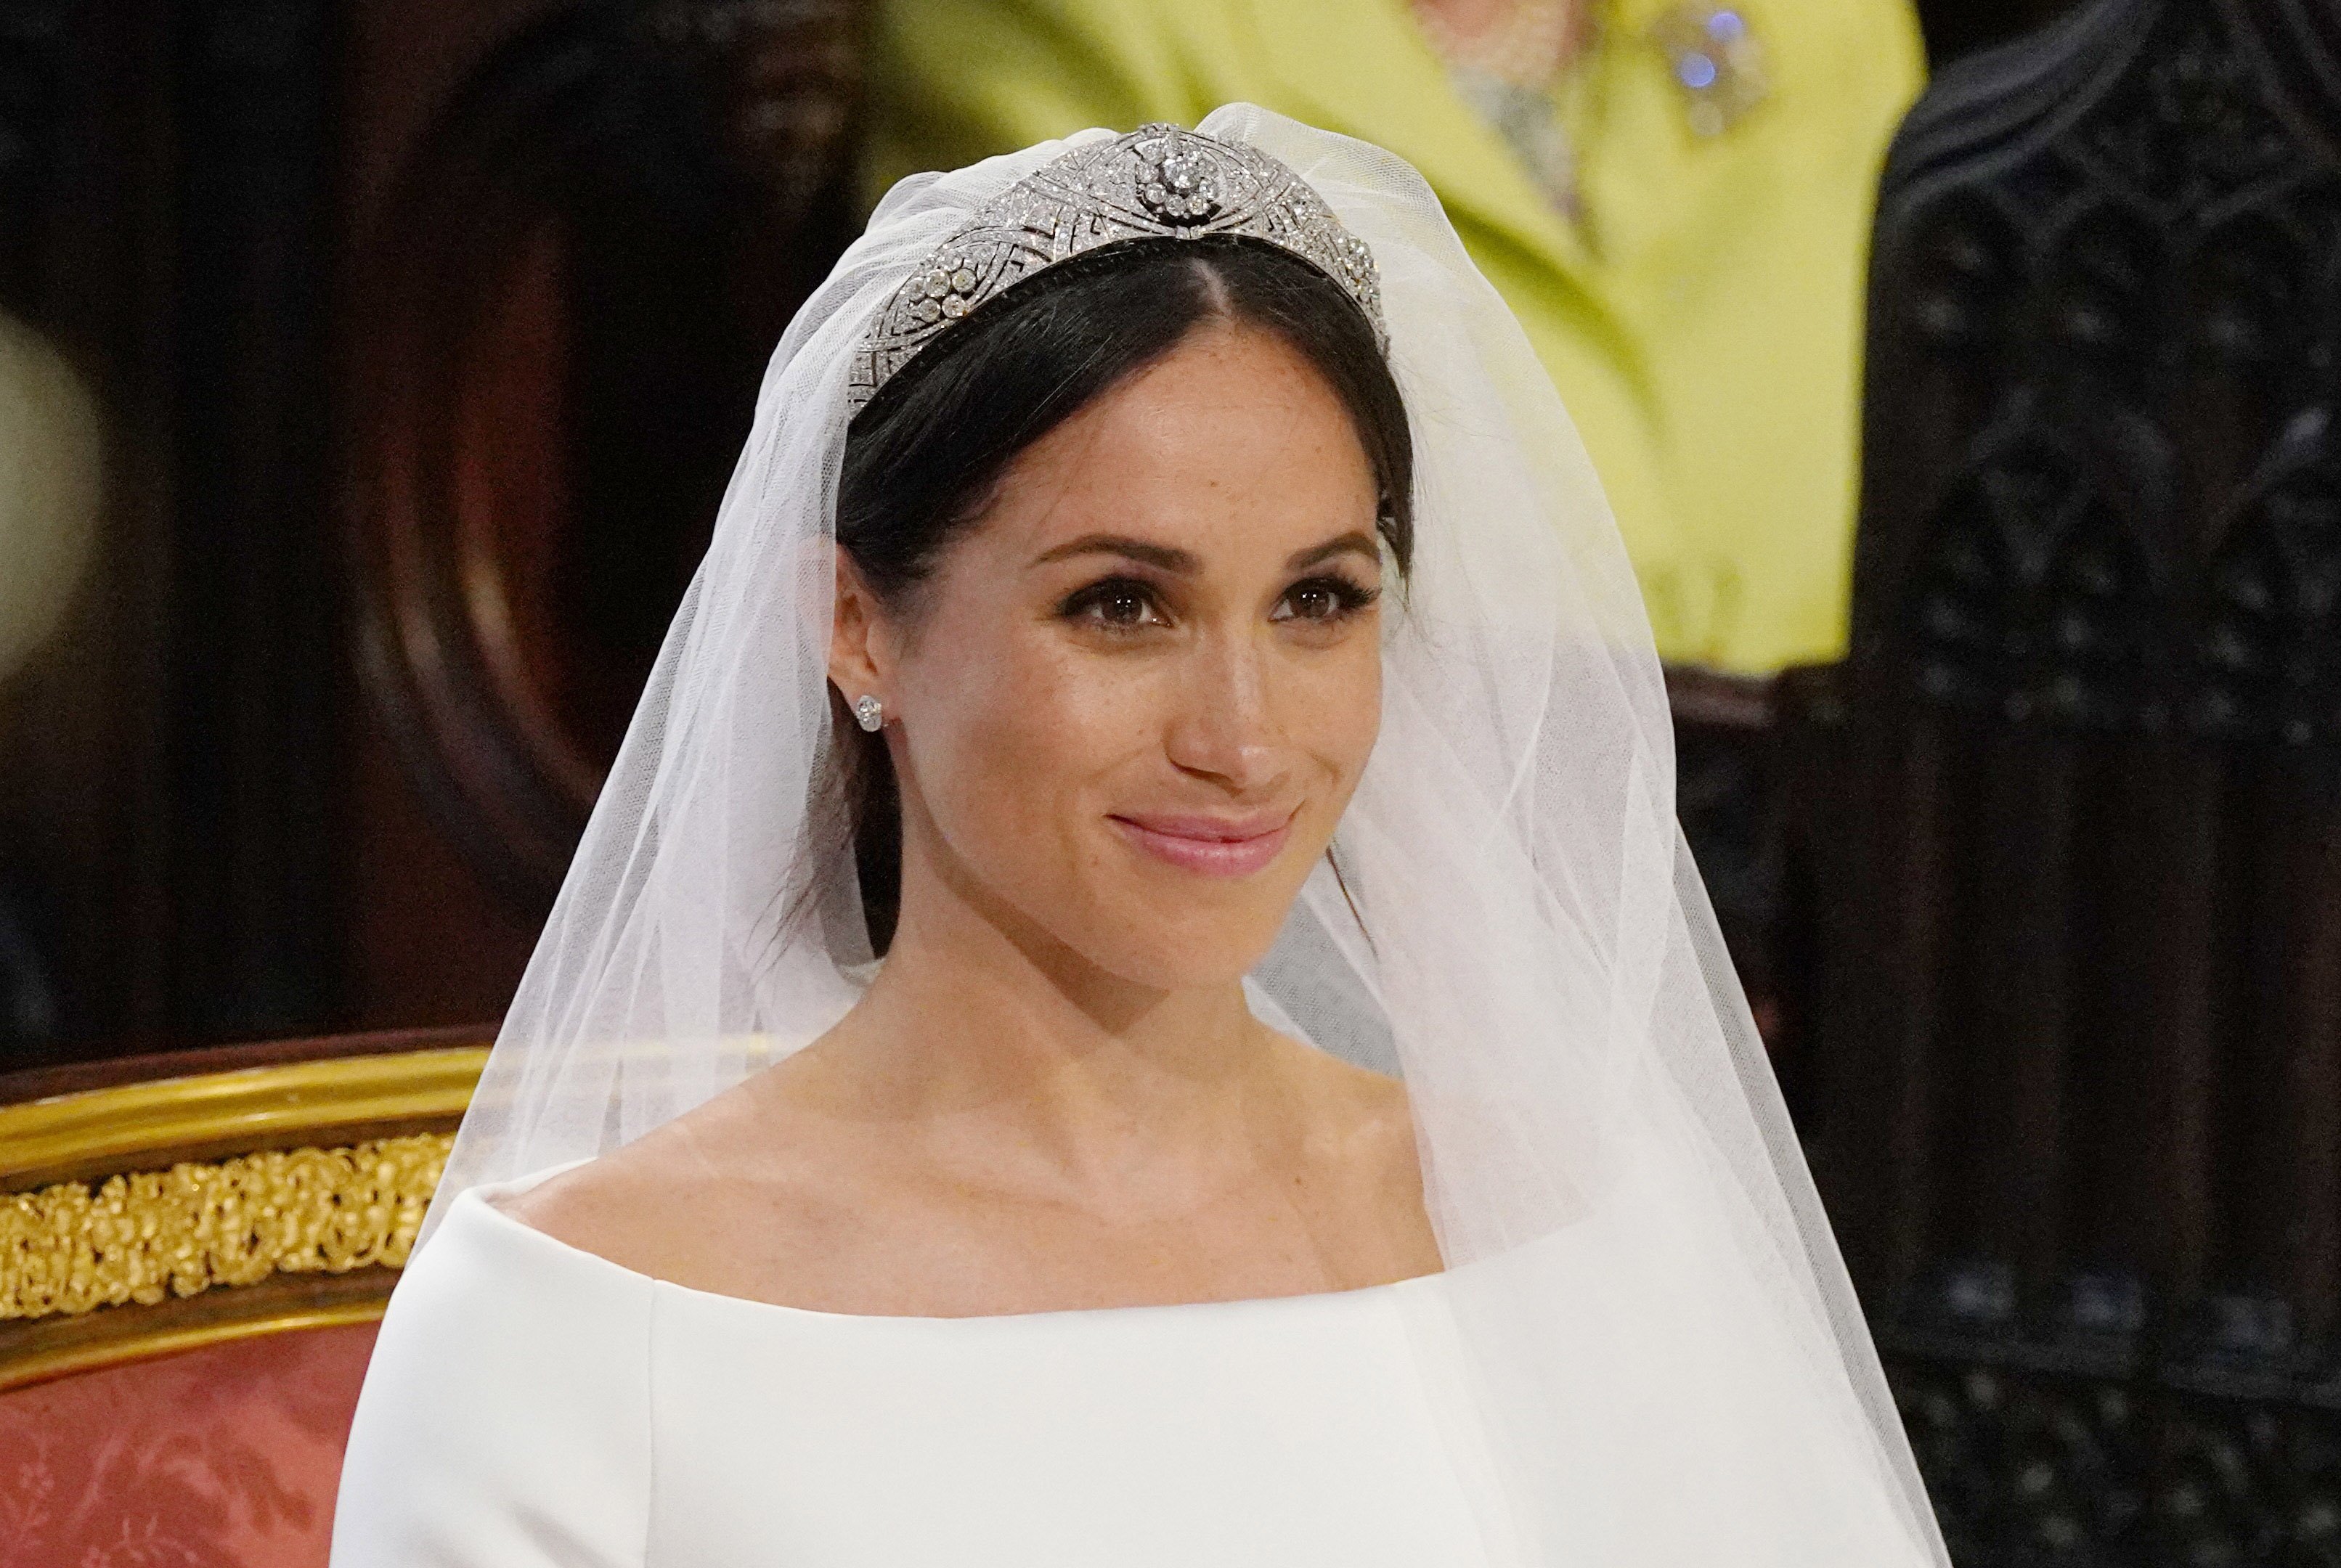 Meghan Markle during her wedding in St George's Chapel at Windsor Castle on May 19, 2018 in Windsor, England ┃Source: Getty Images